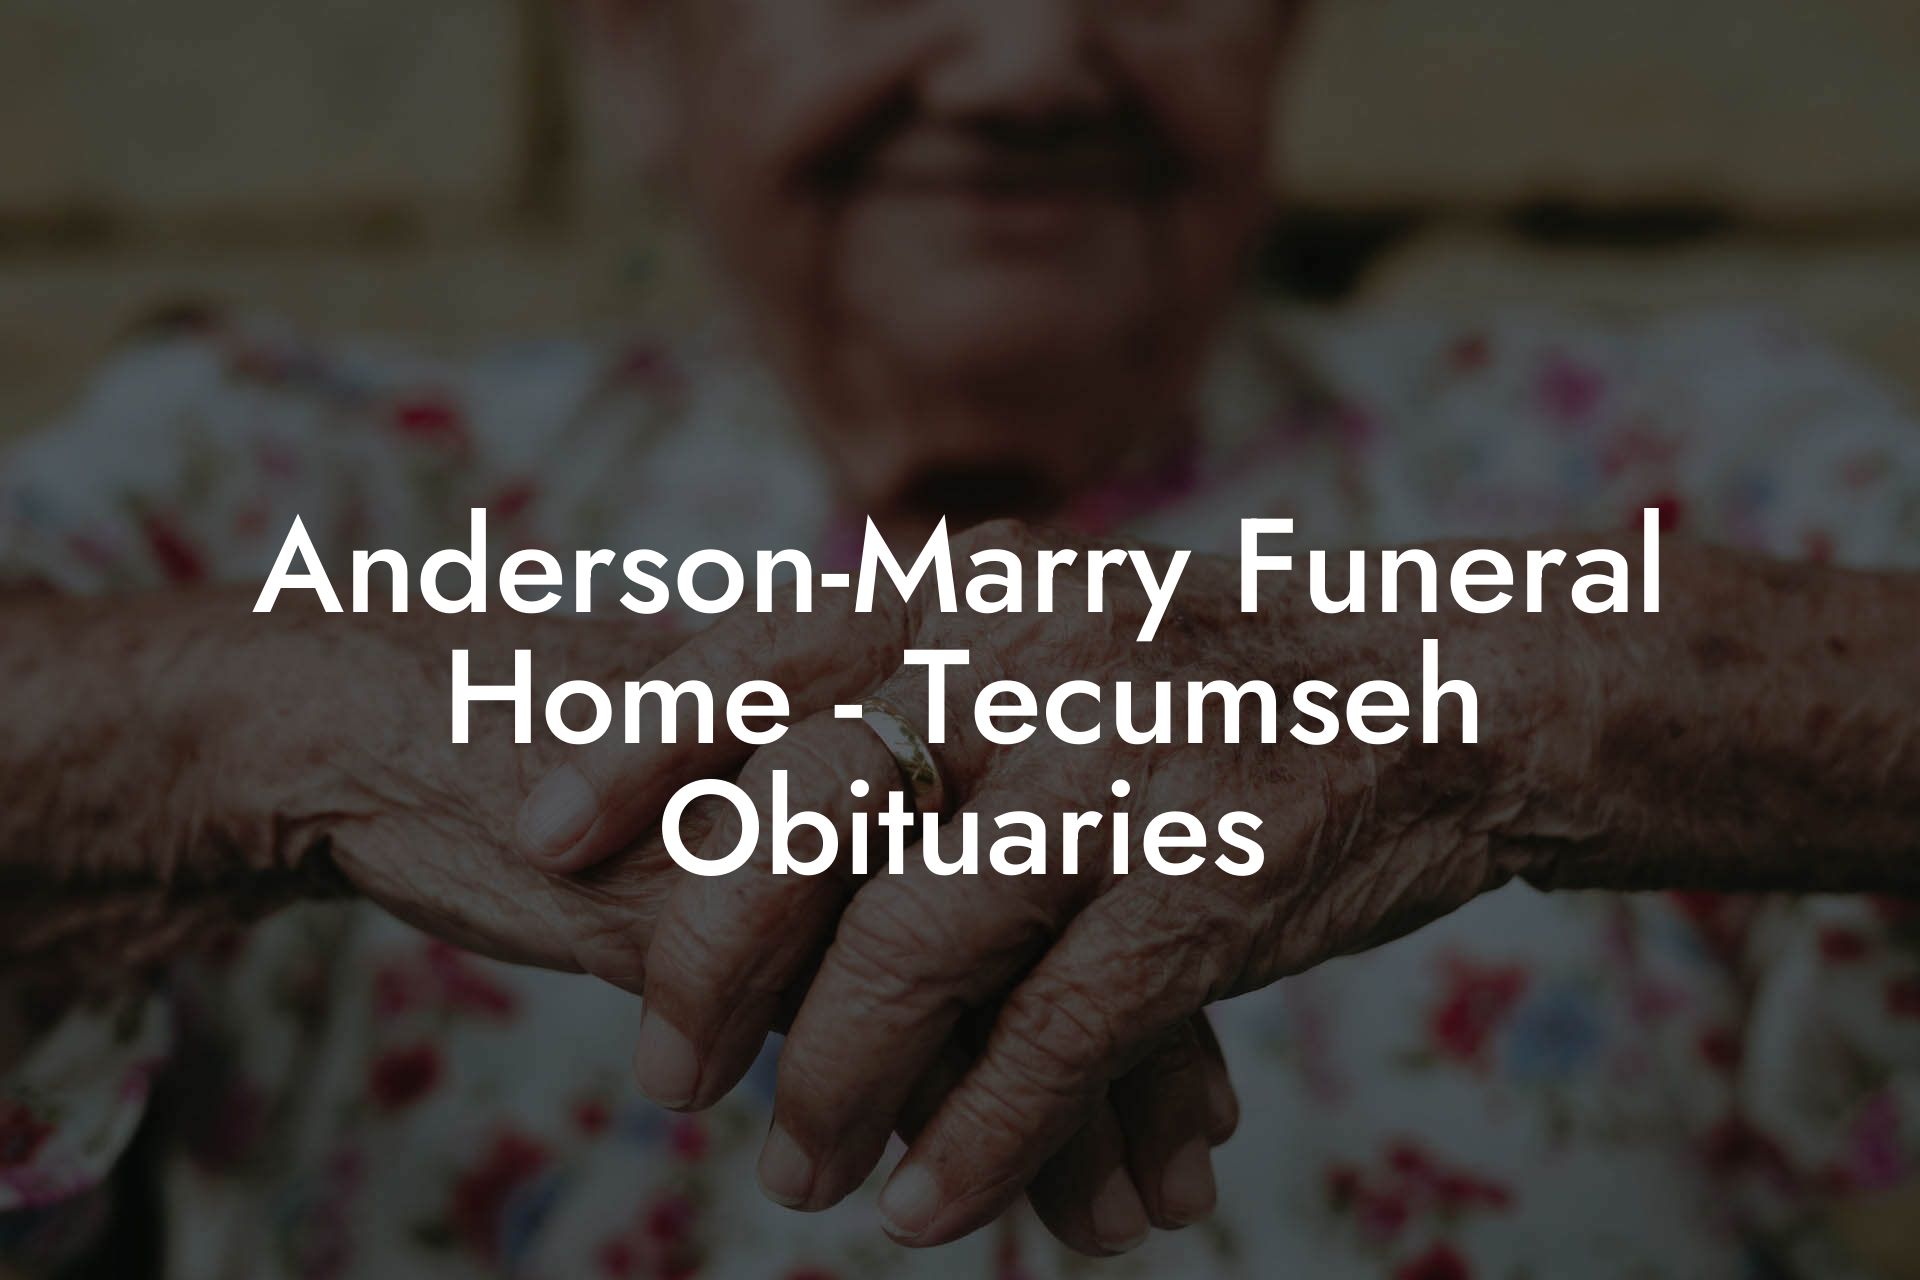 Anderson-Marry Funeral Home - Tecumseh Obituaries